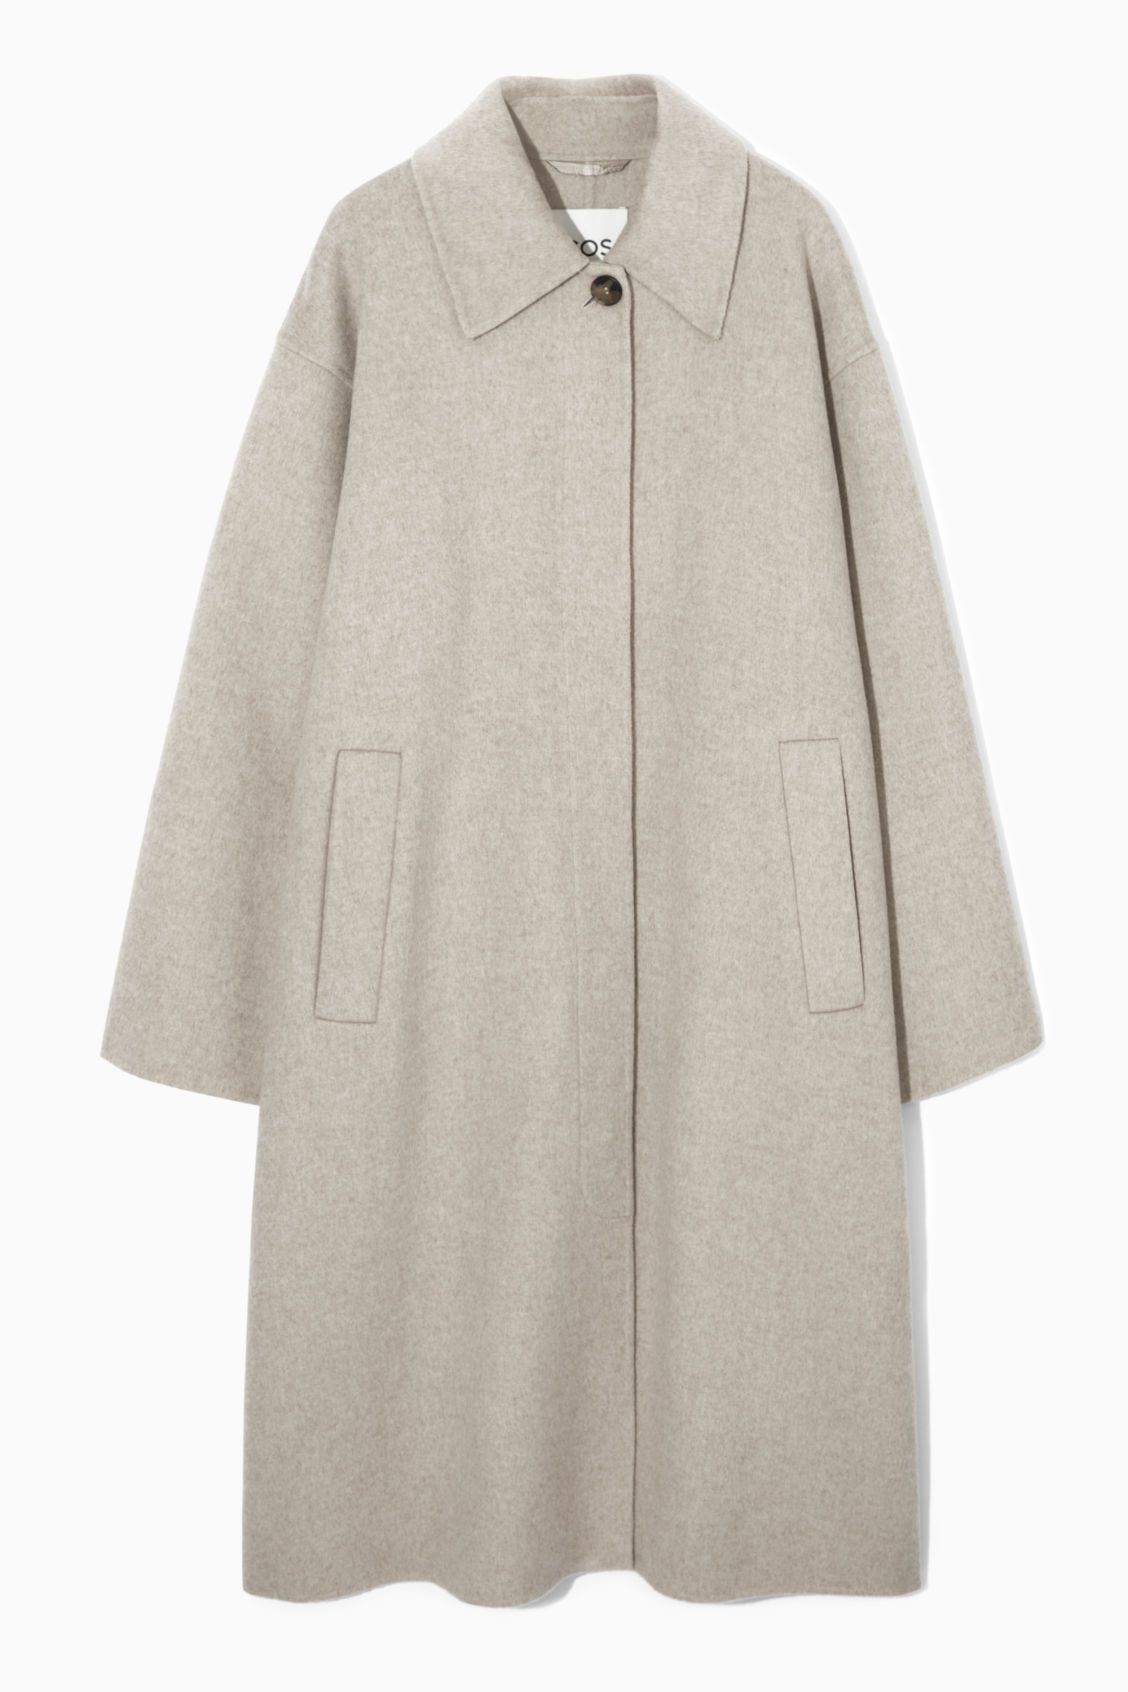 COLLARED DOUBLE-FACED WOOL COAT - LIGHT BEIGE MÉLANGE - COS | COS (US)